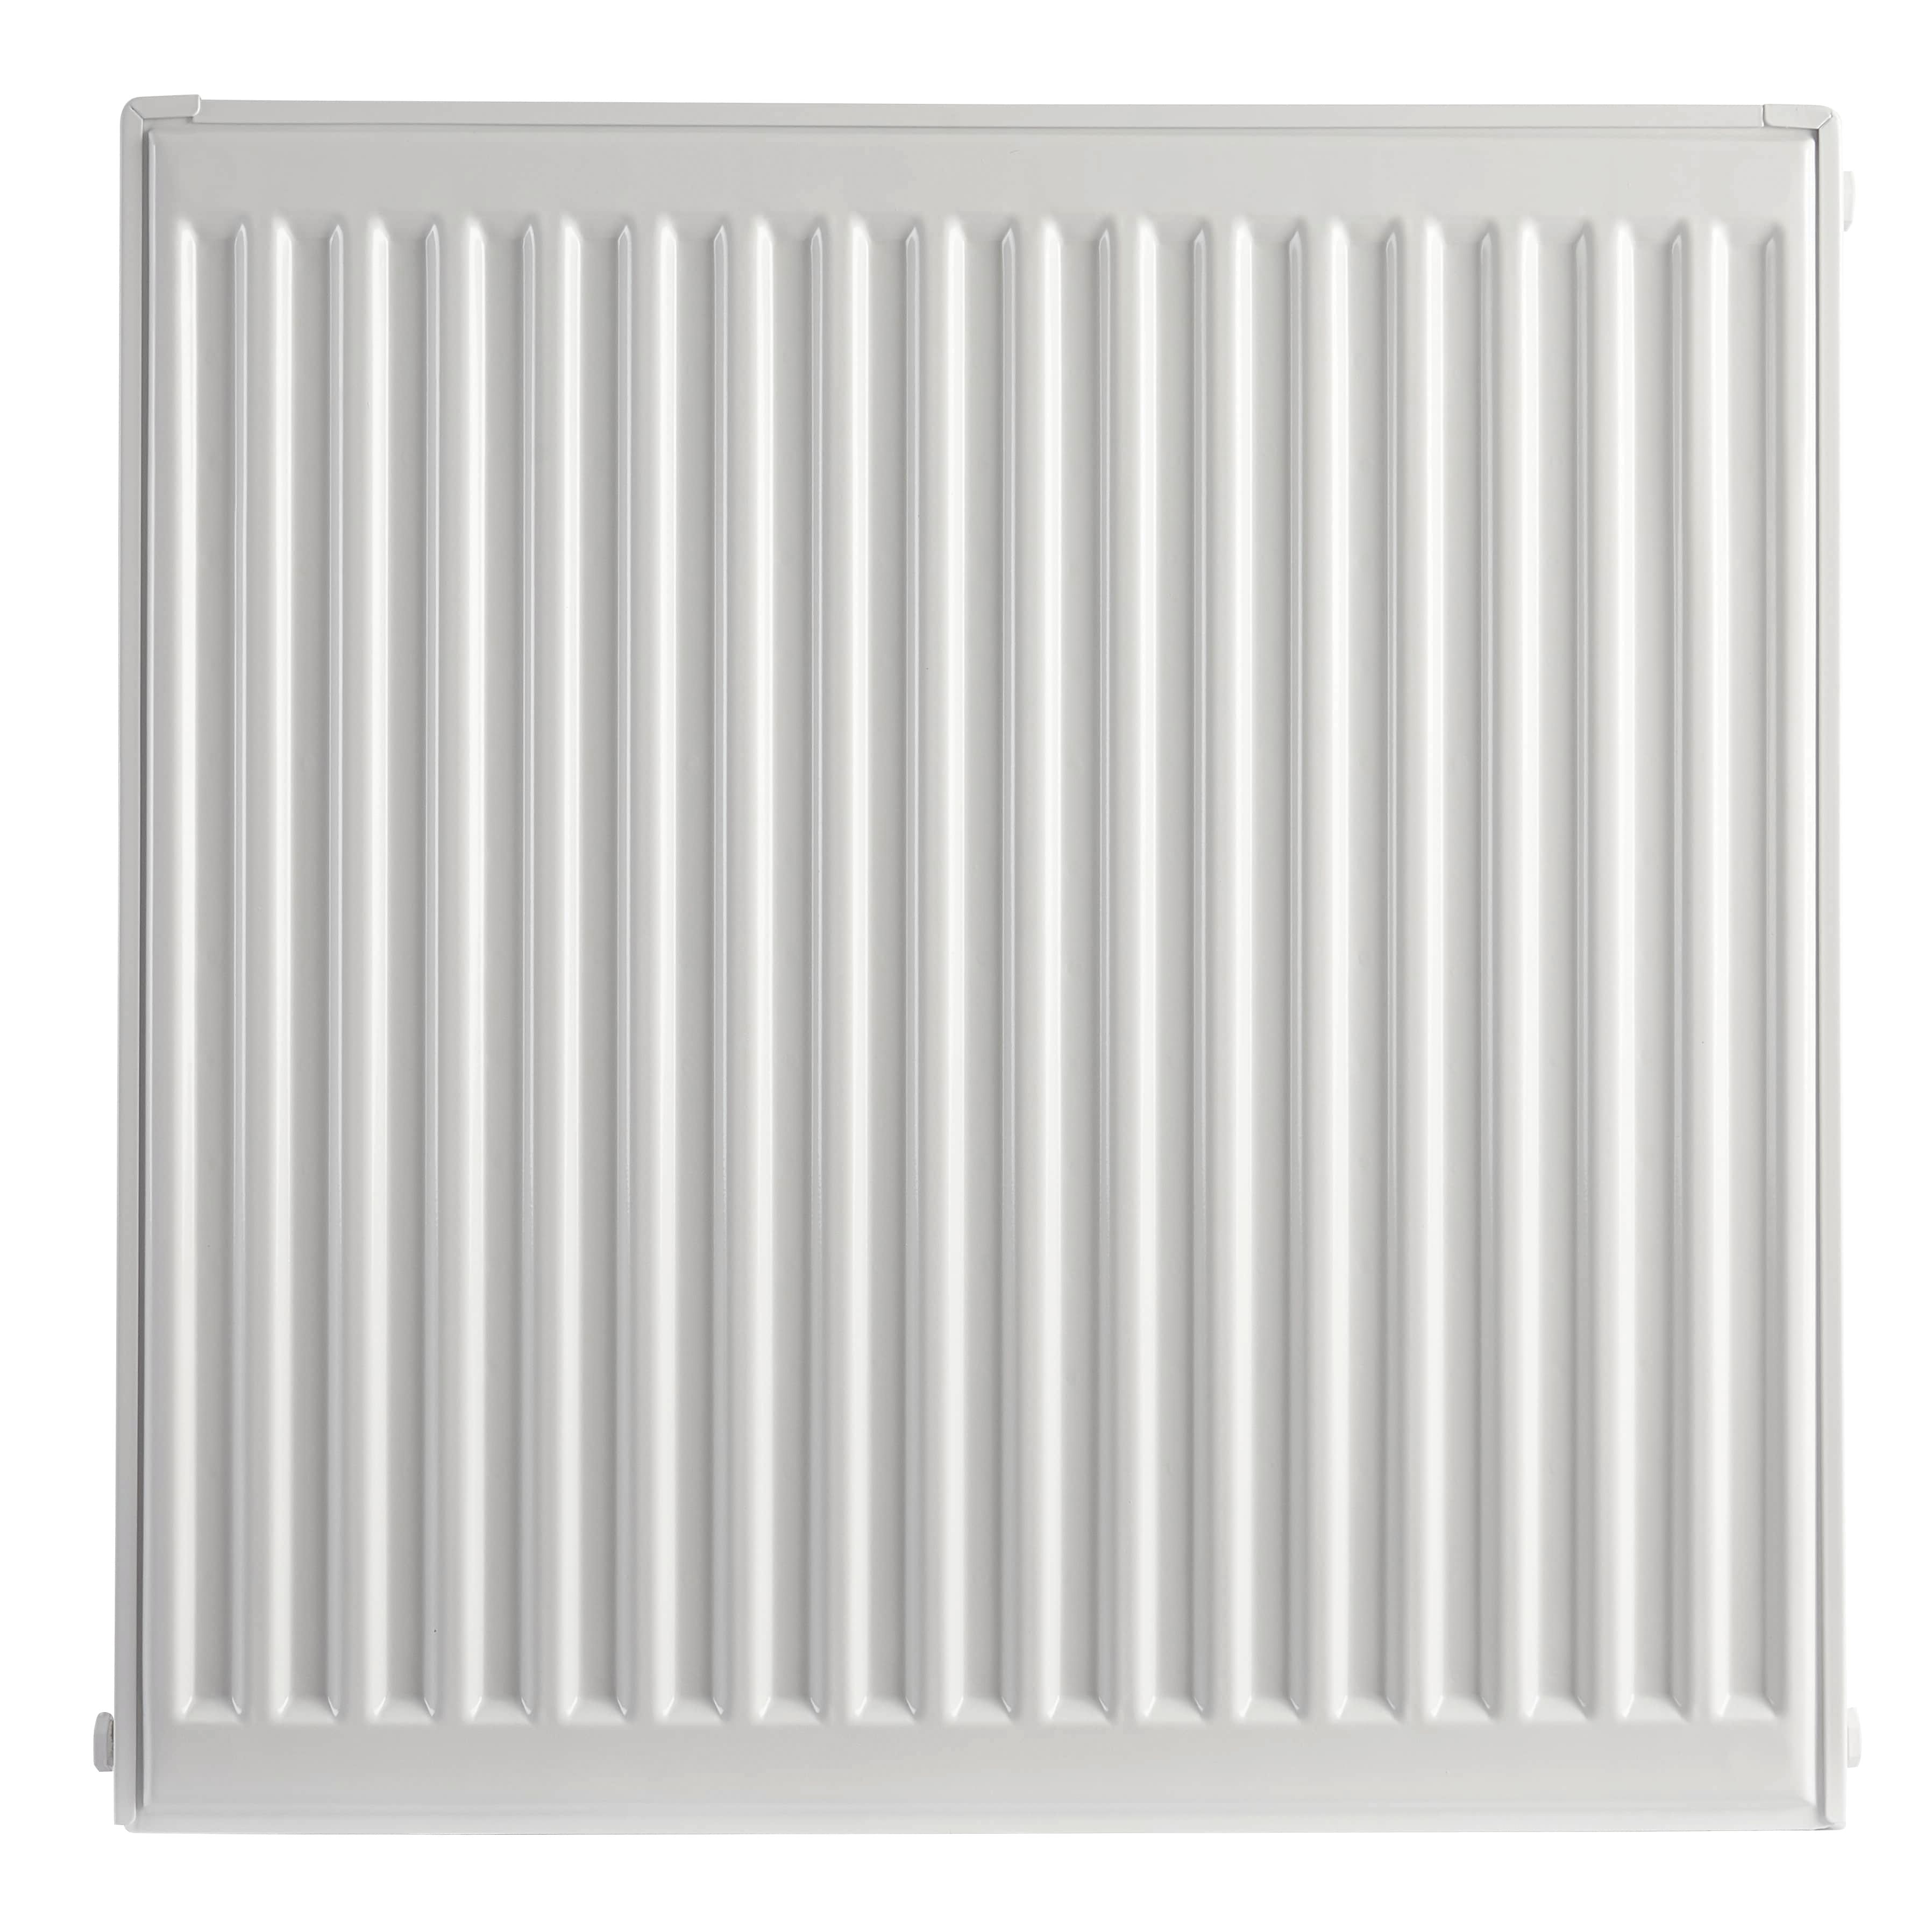 Image of Homeline by Stelrad 600 x 500mm Type 21 Double Panel Plus Single Convector Radiator